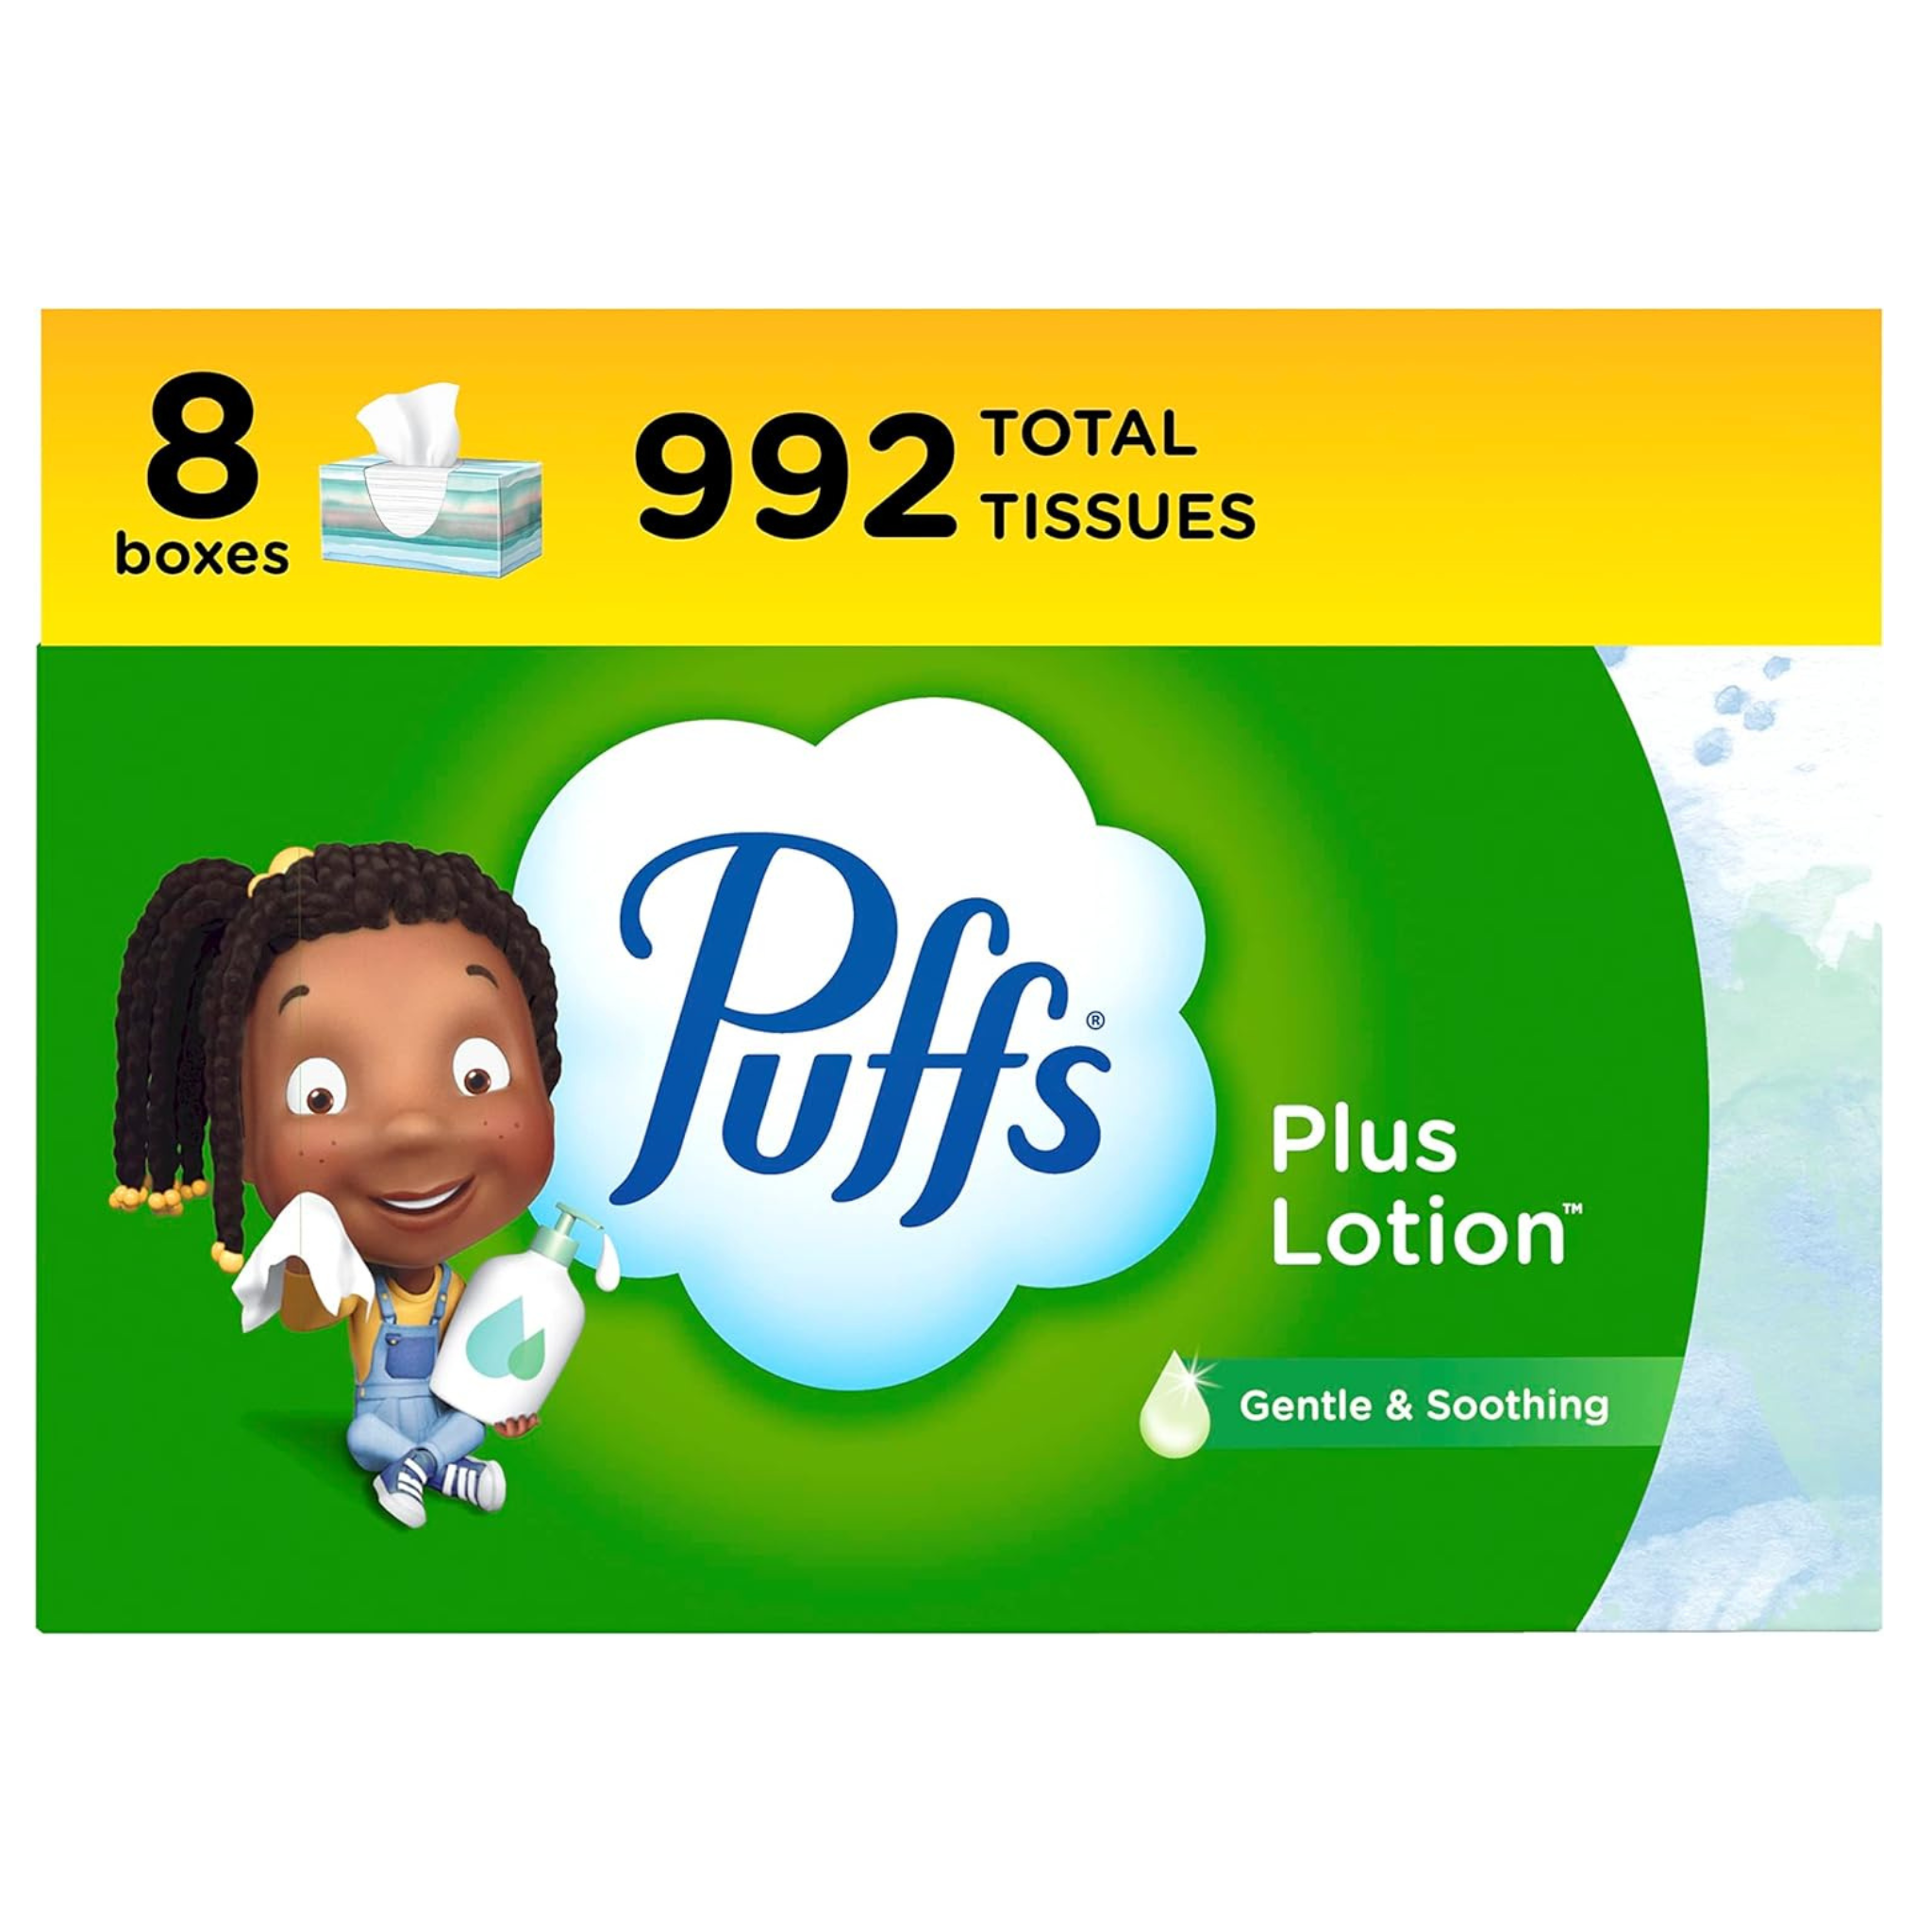 8 Family Boxes Of Puffs Plus Lotion Facial Tissues